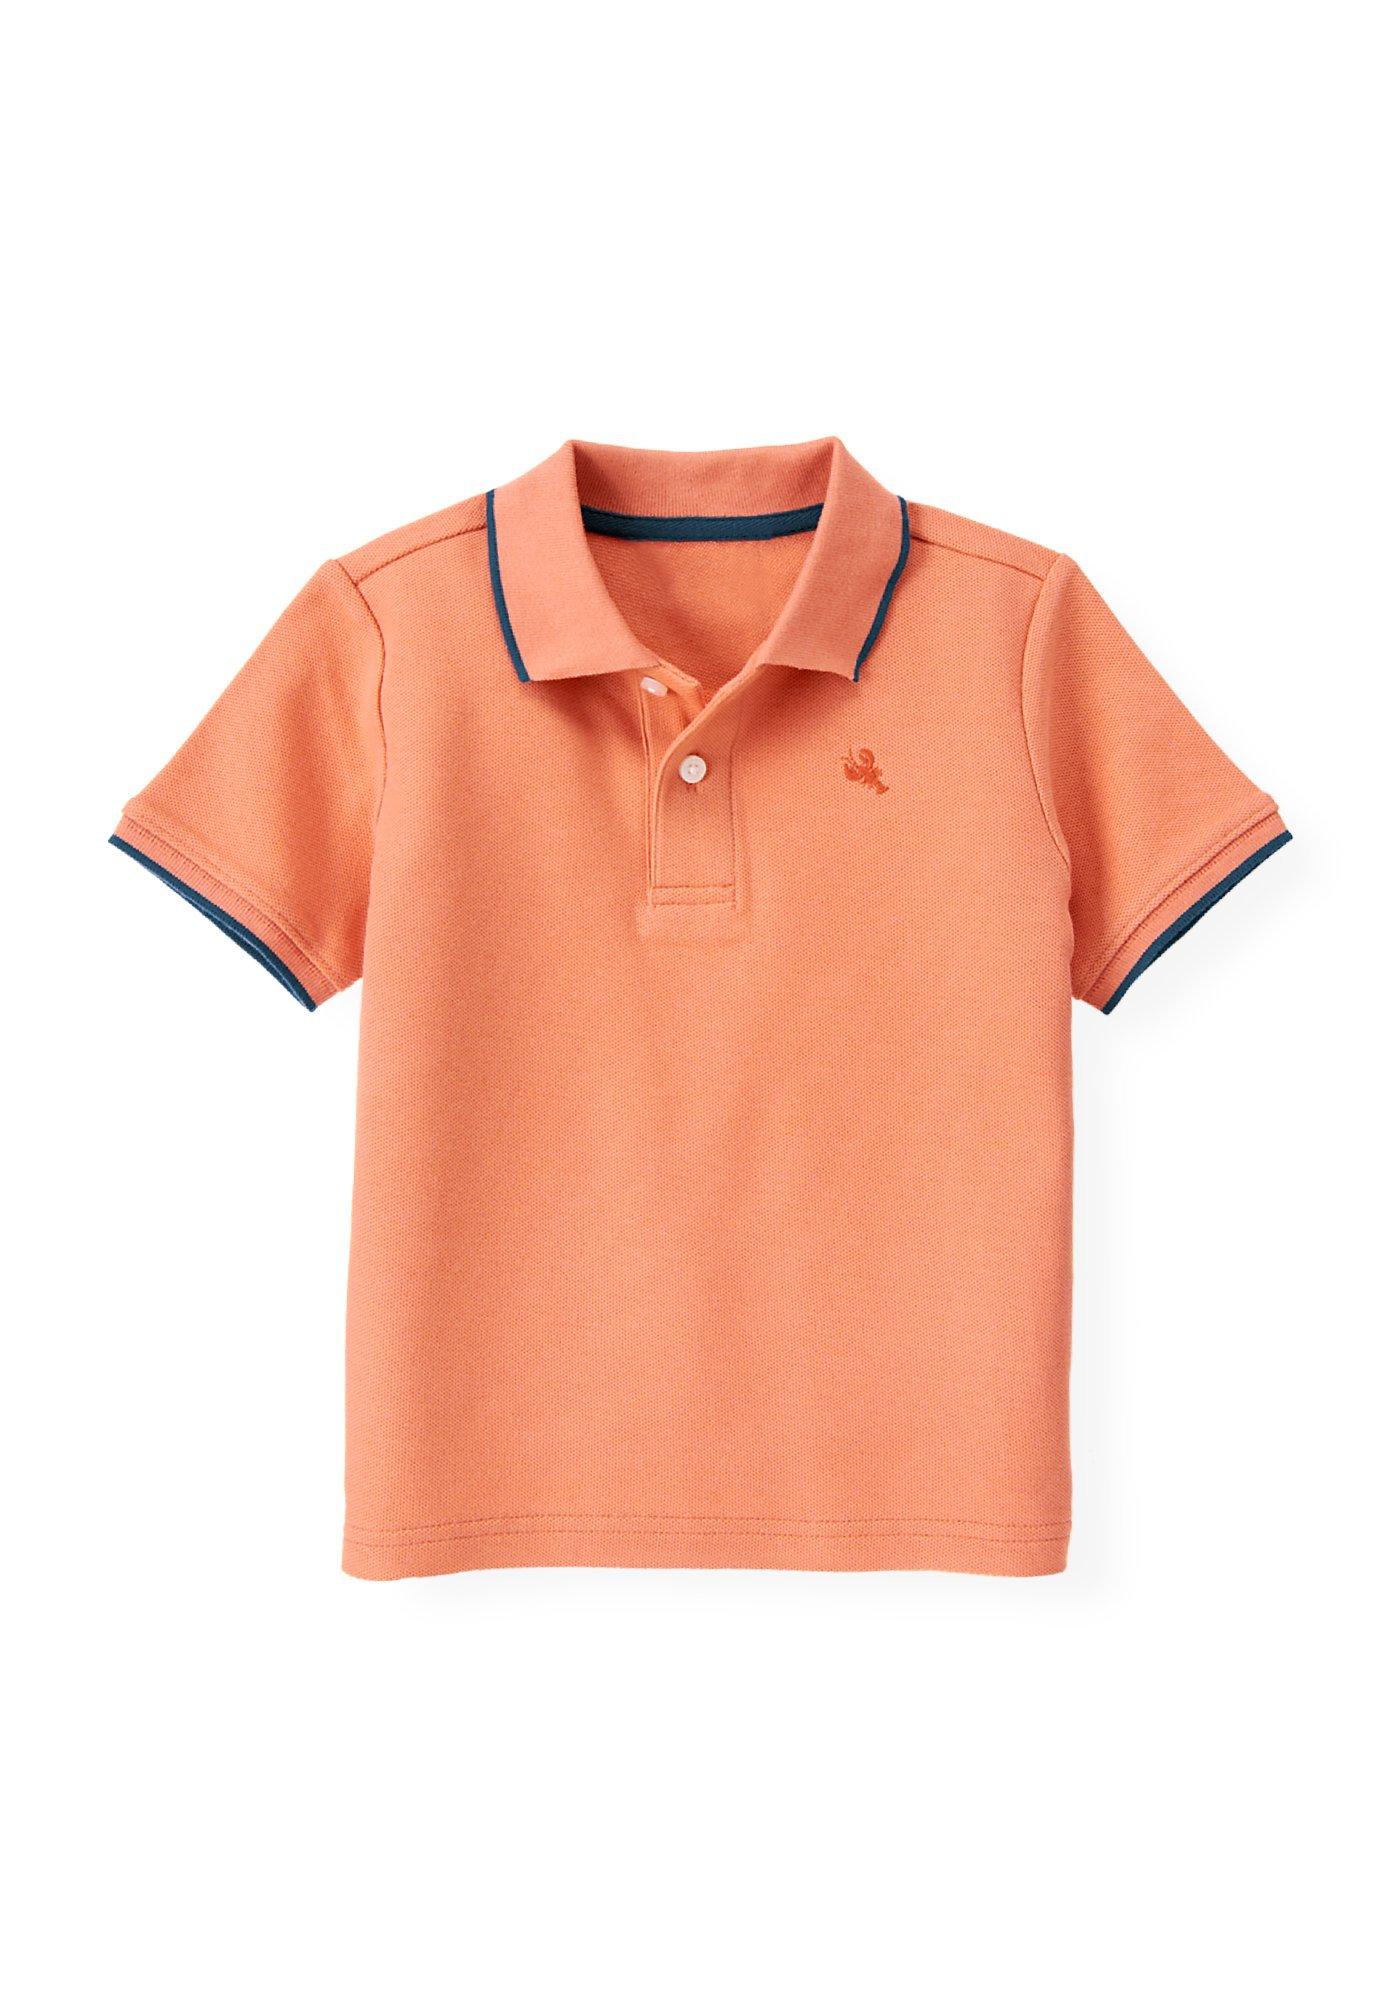 Lobster Tipped Polo Shirt image number 0